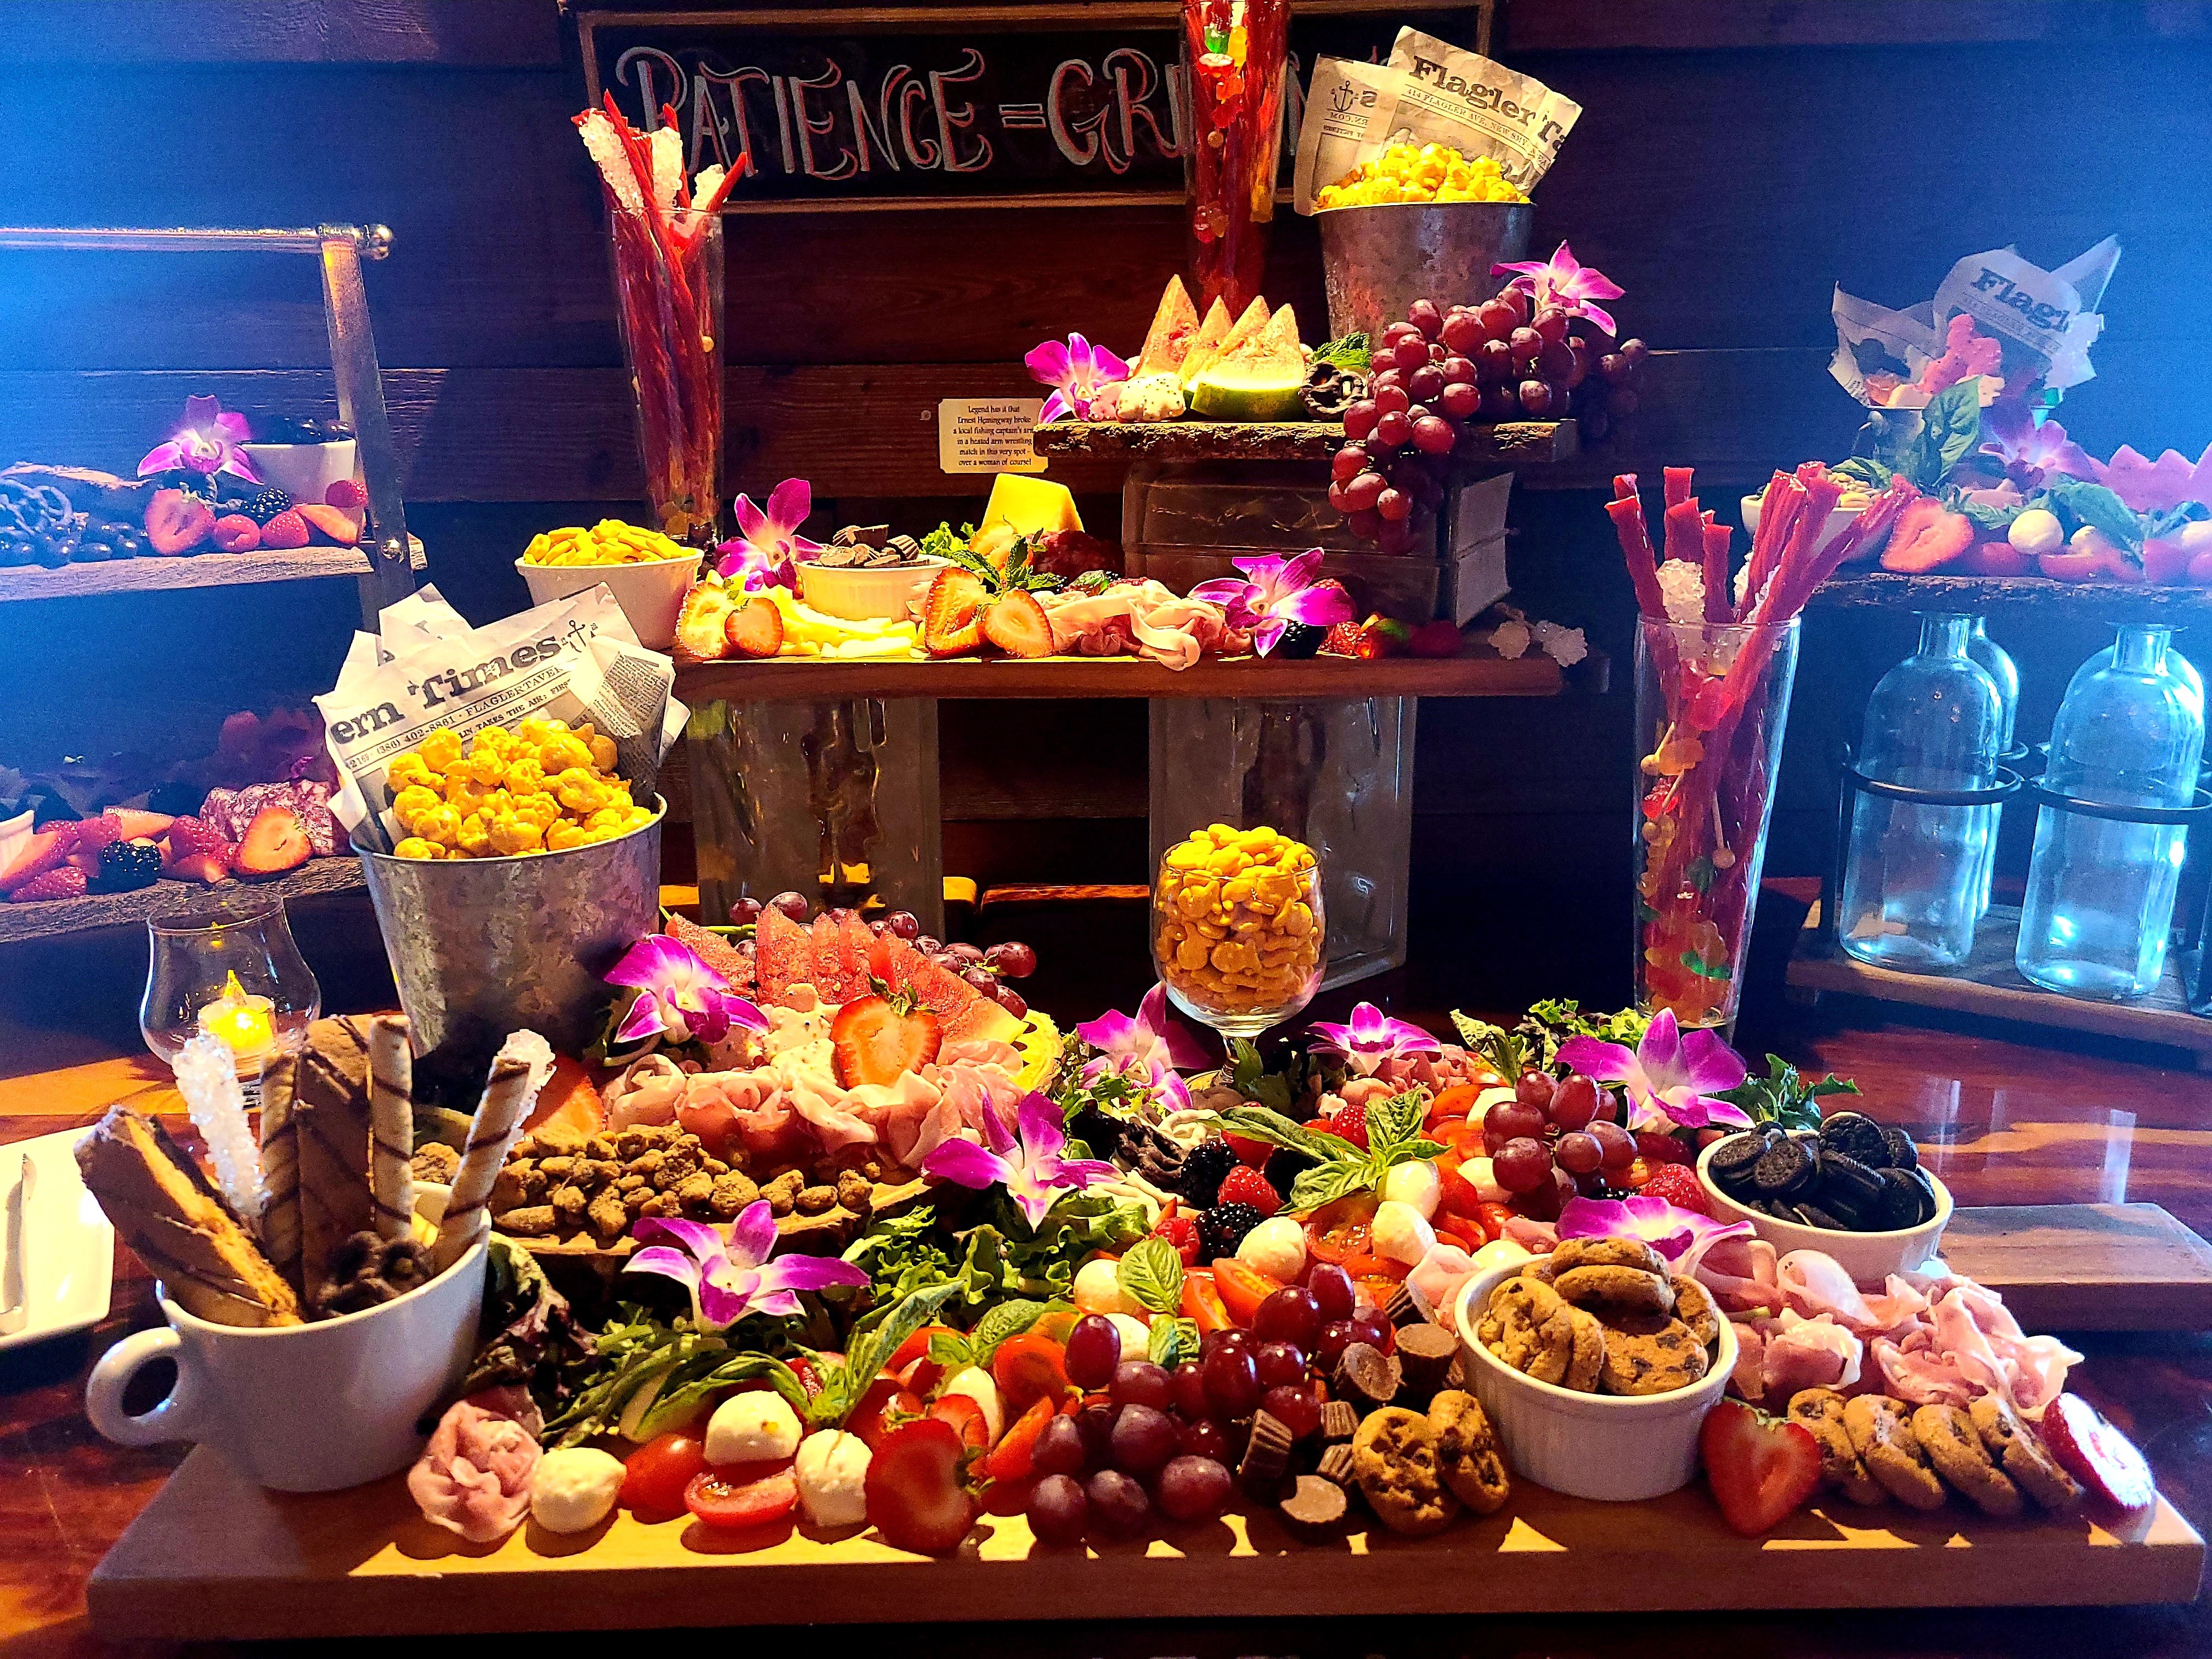 Flagler Tavern offers private event space with a full catering menu including this fabulous Sweet and Salty Snack table.